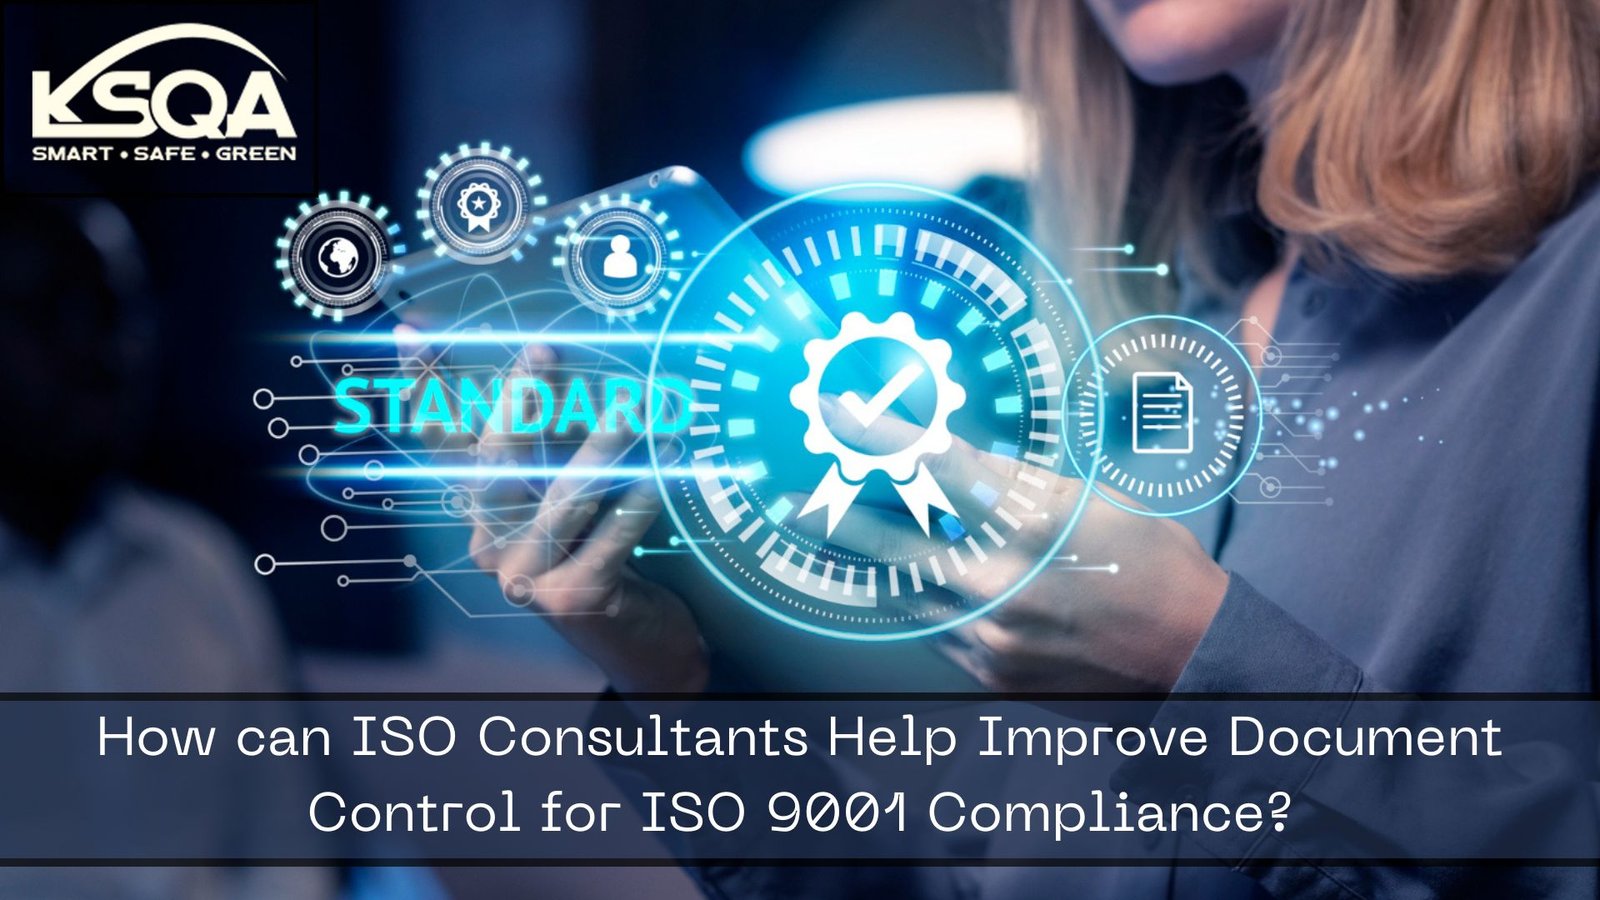 How can ISO Consultants Help Improve Document Control for ISO 9001 Compliance?